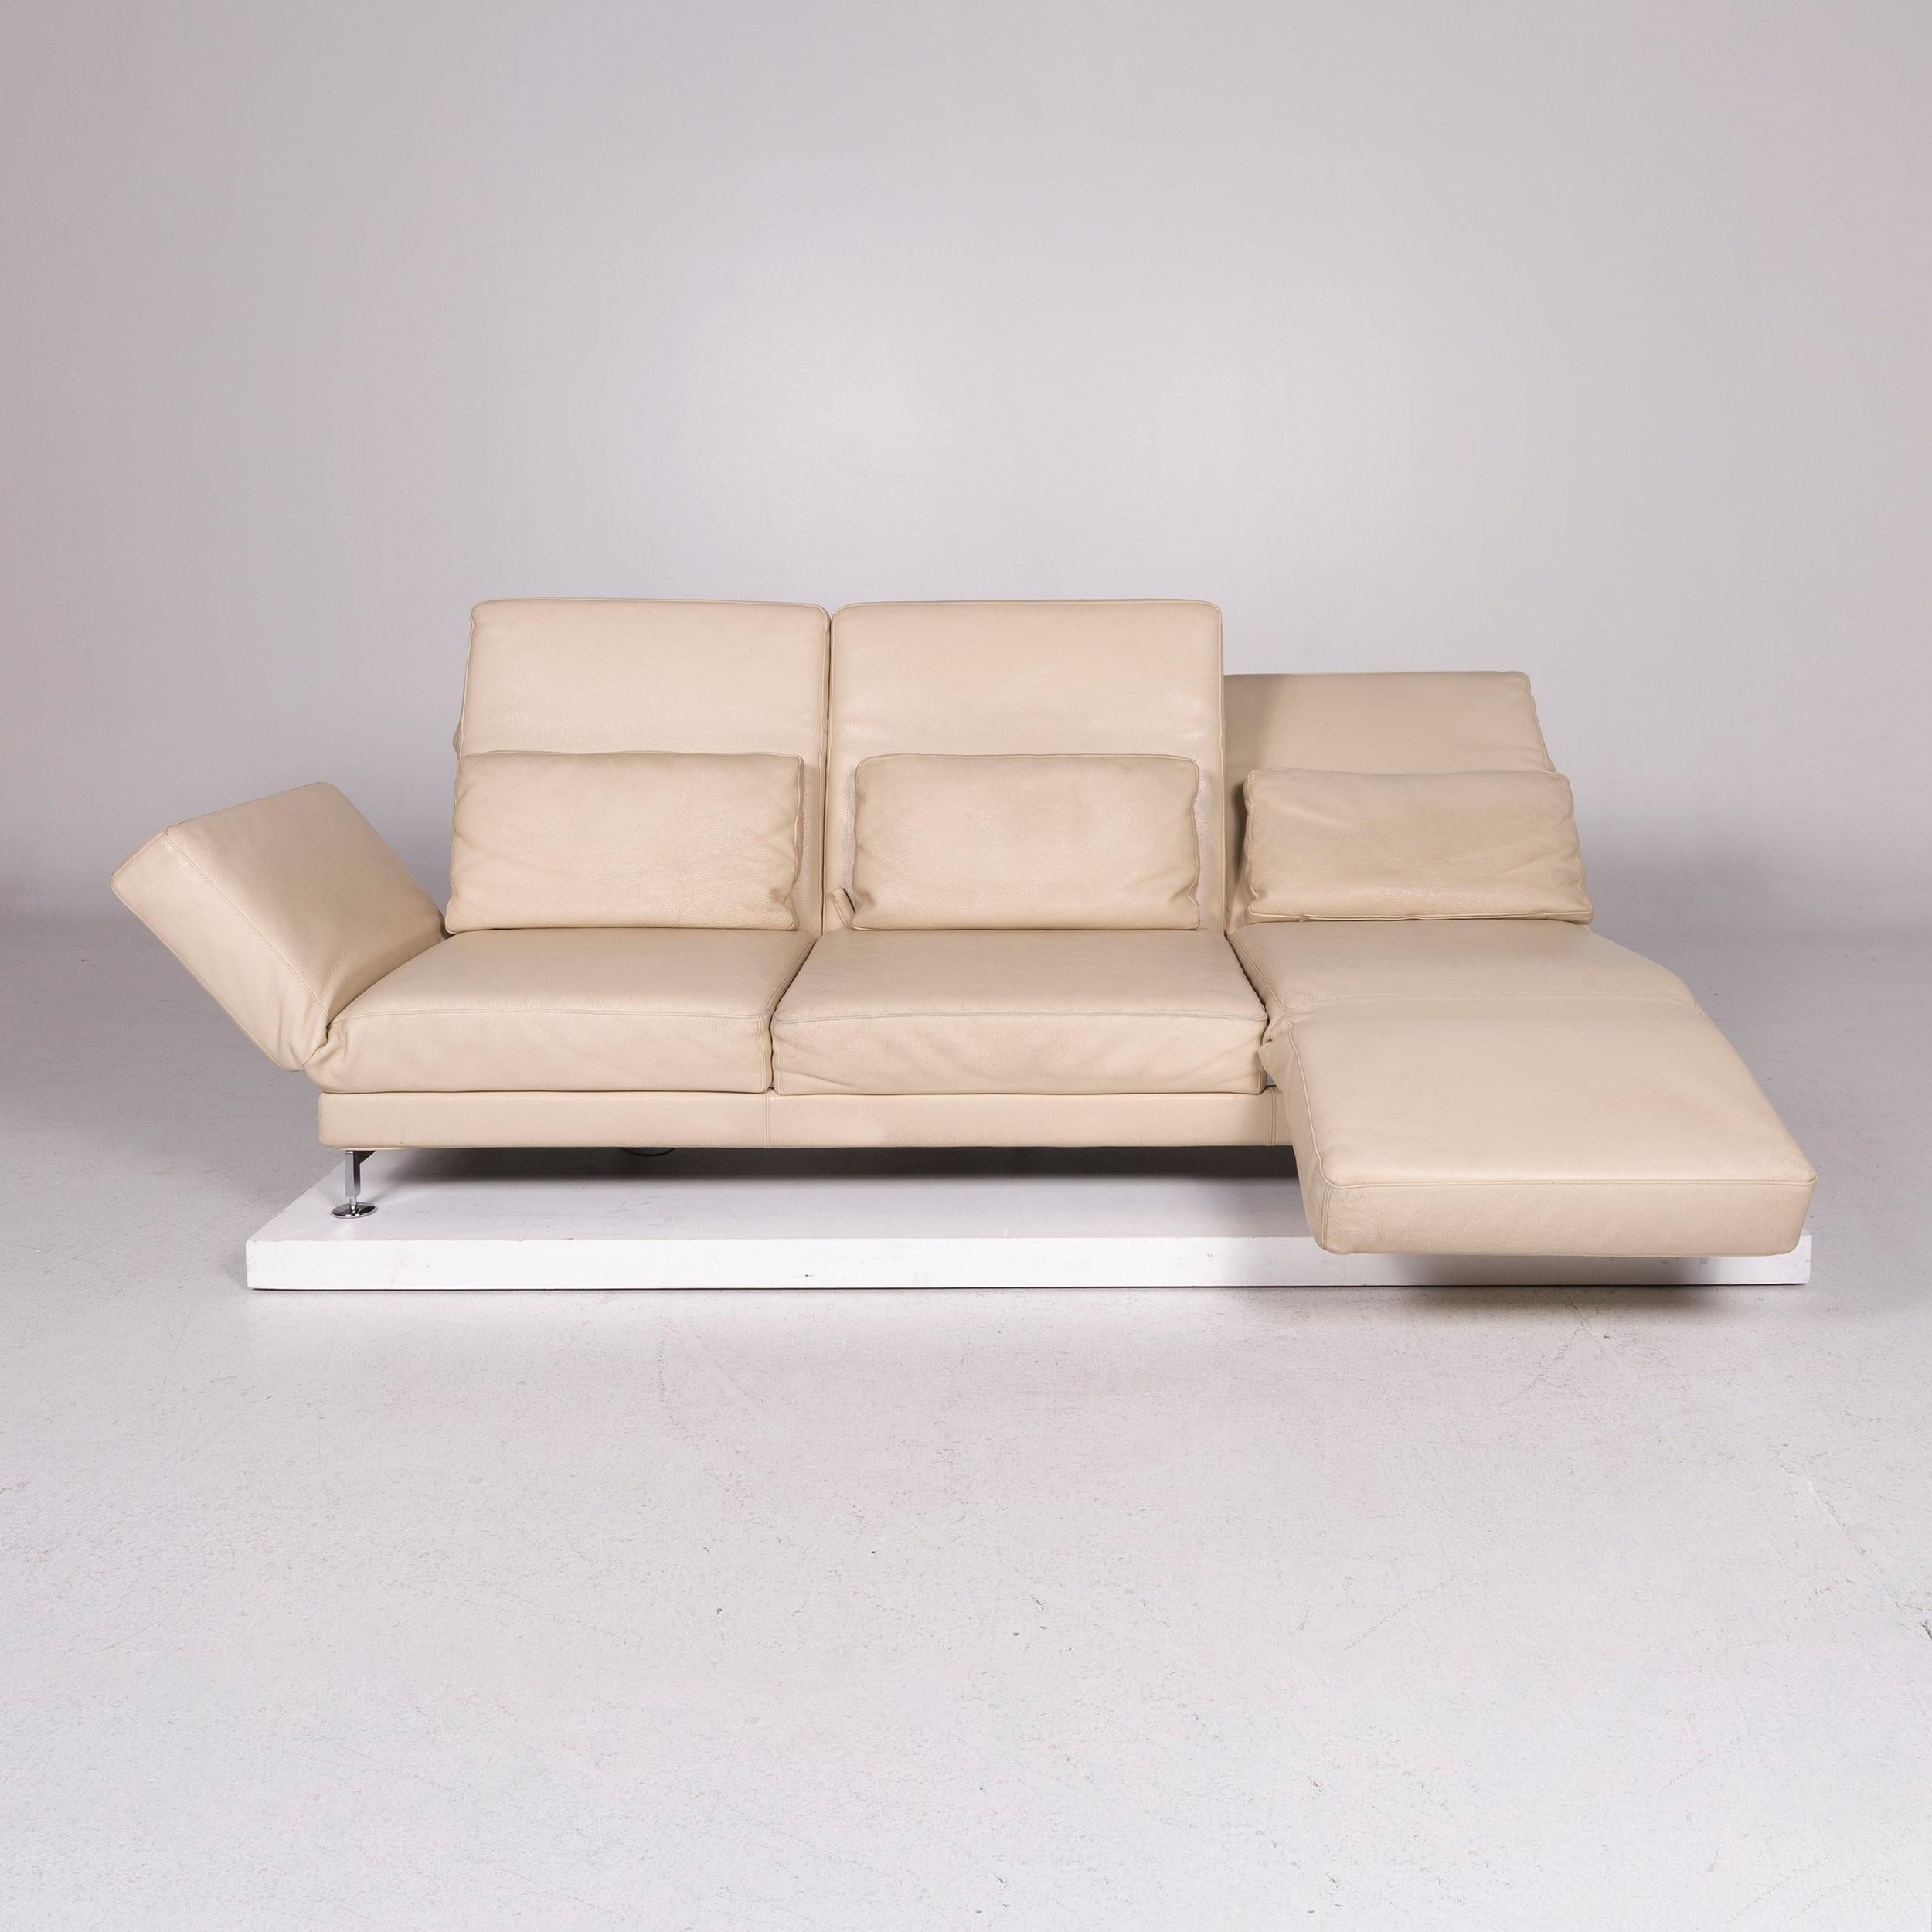 Modern Brühl & Sippold Moule Leather Sofa Beige Three-Seat Relax Function Couch For Sale